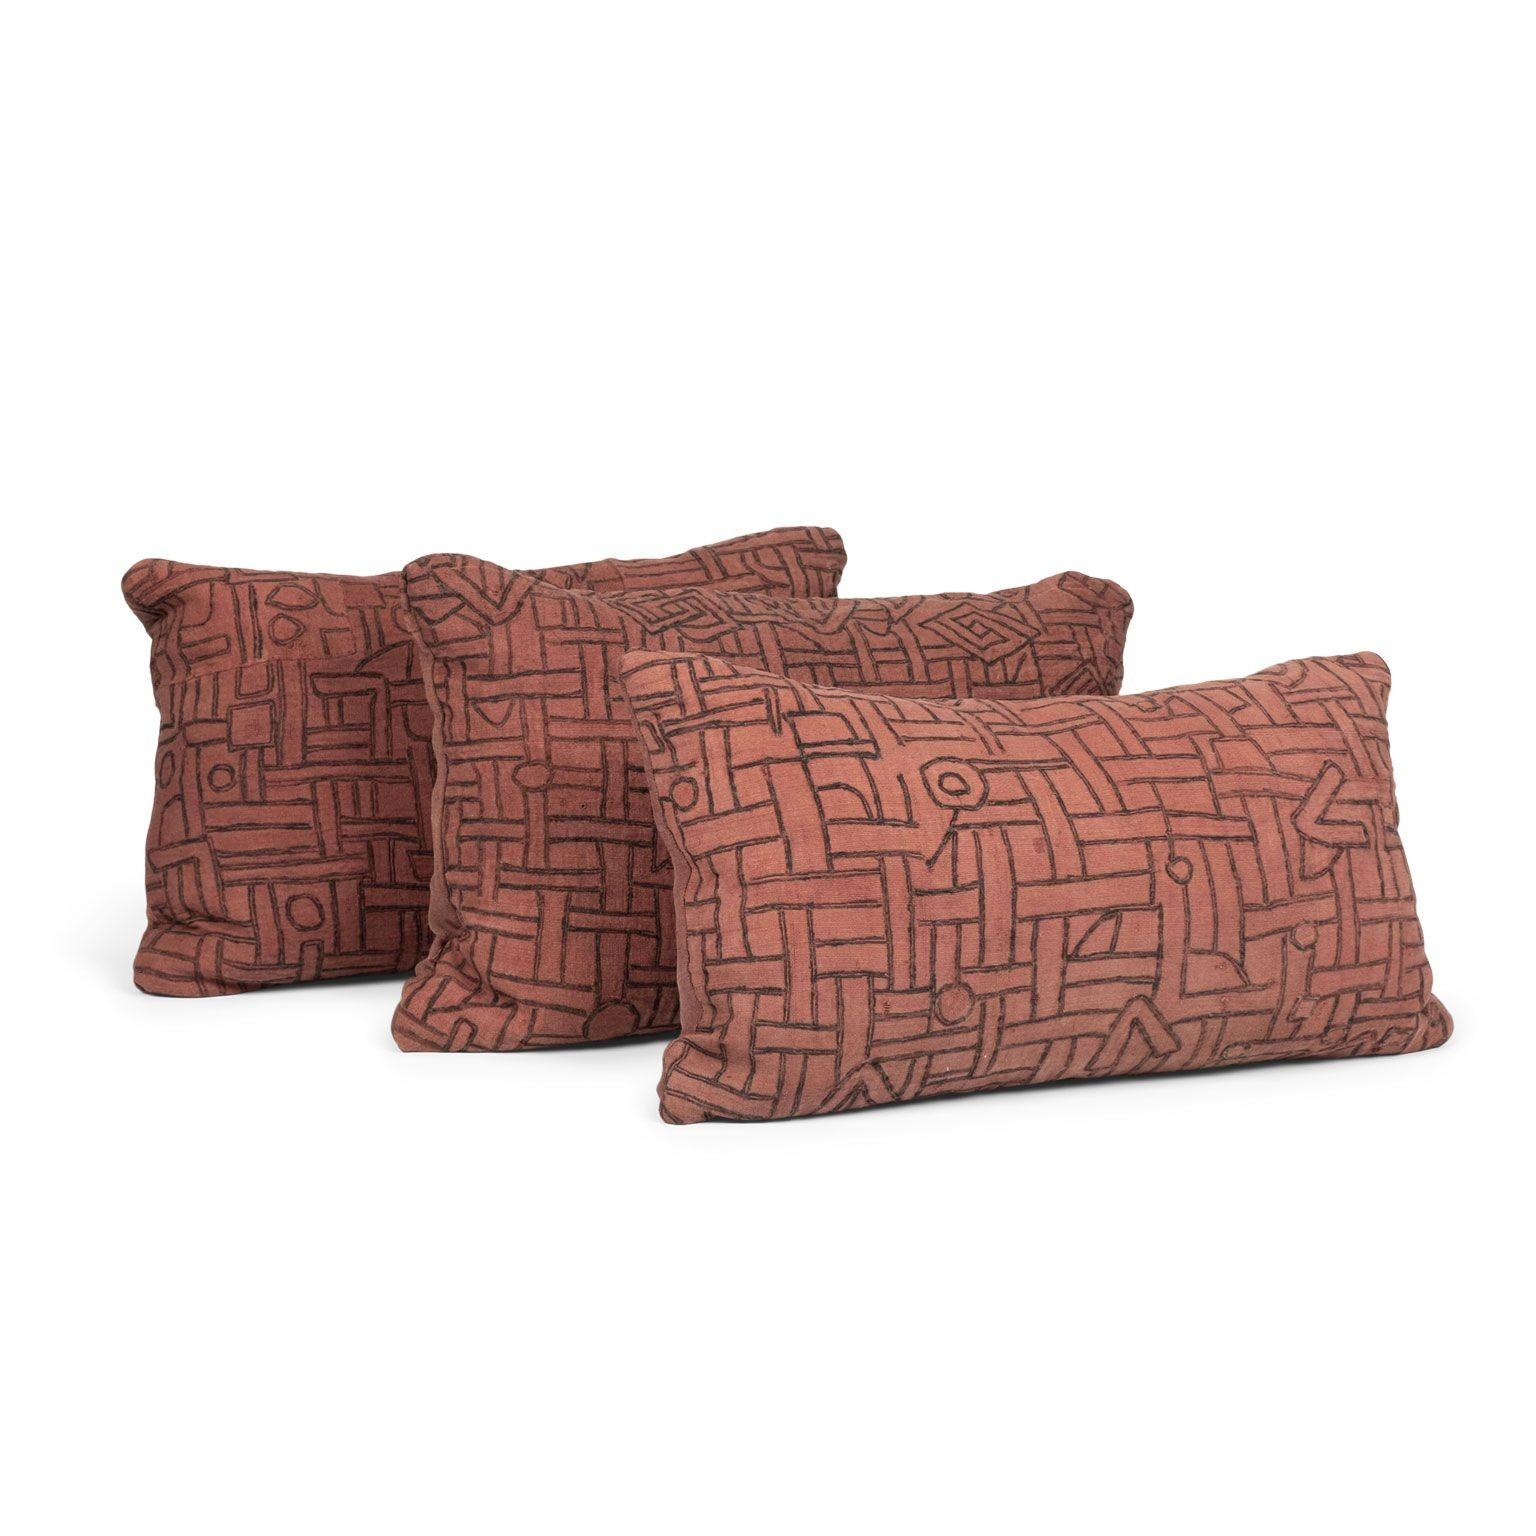 Woven Faded Plum-Color Embroidered Lumbar Cushion For Sale